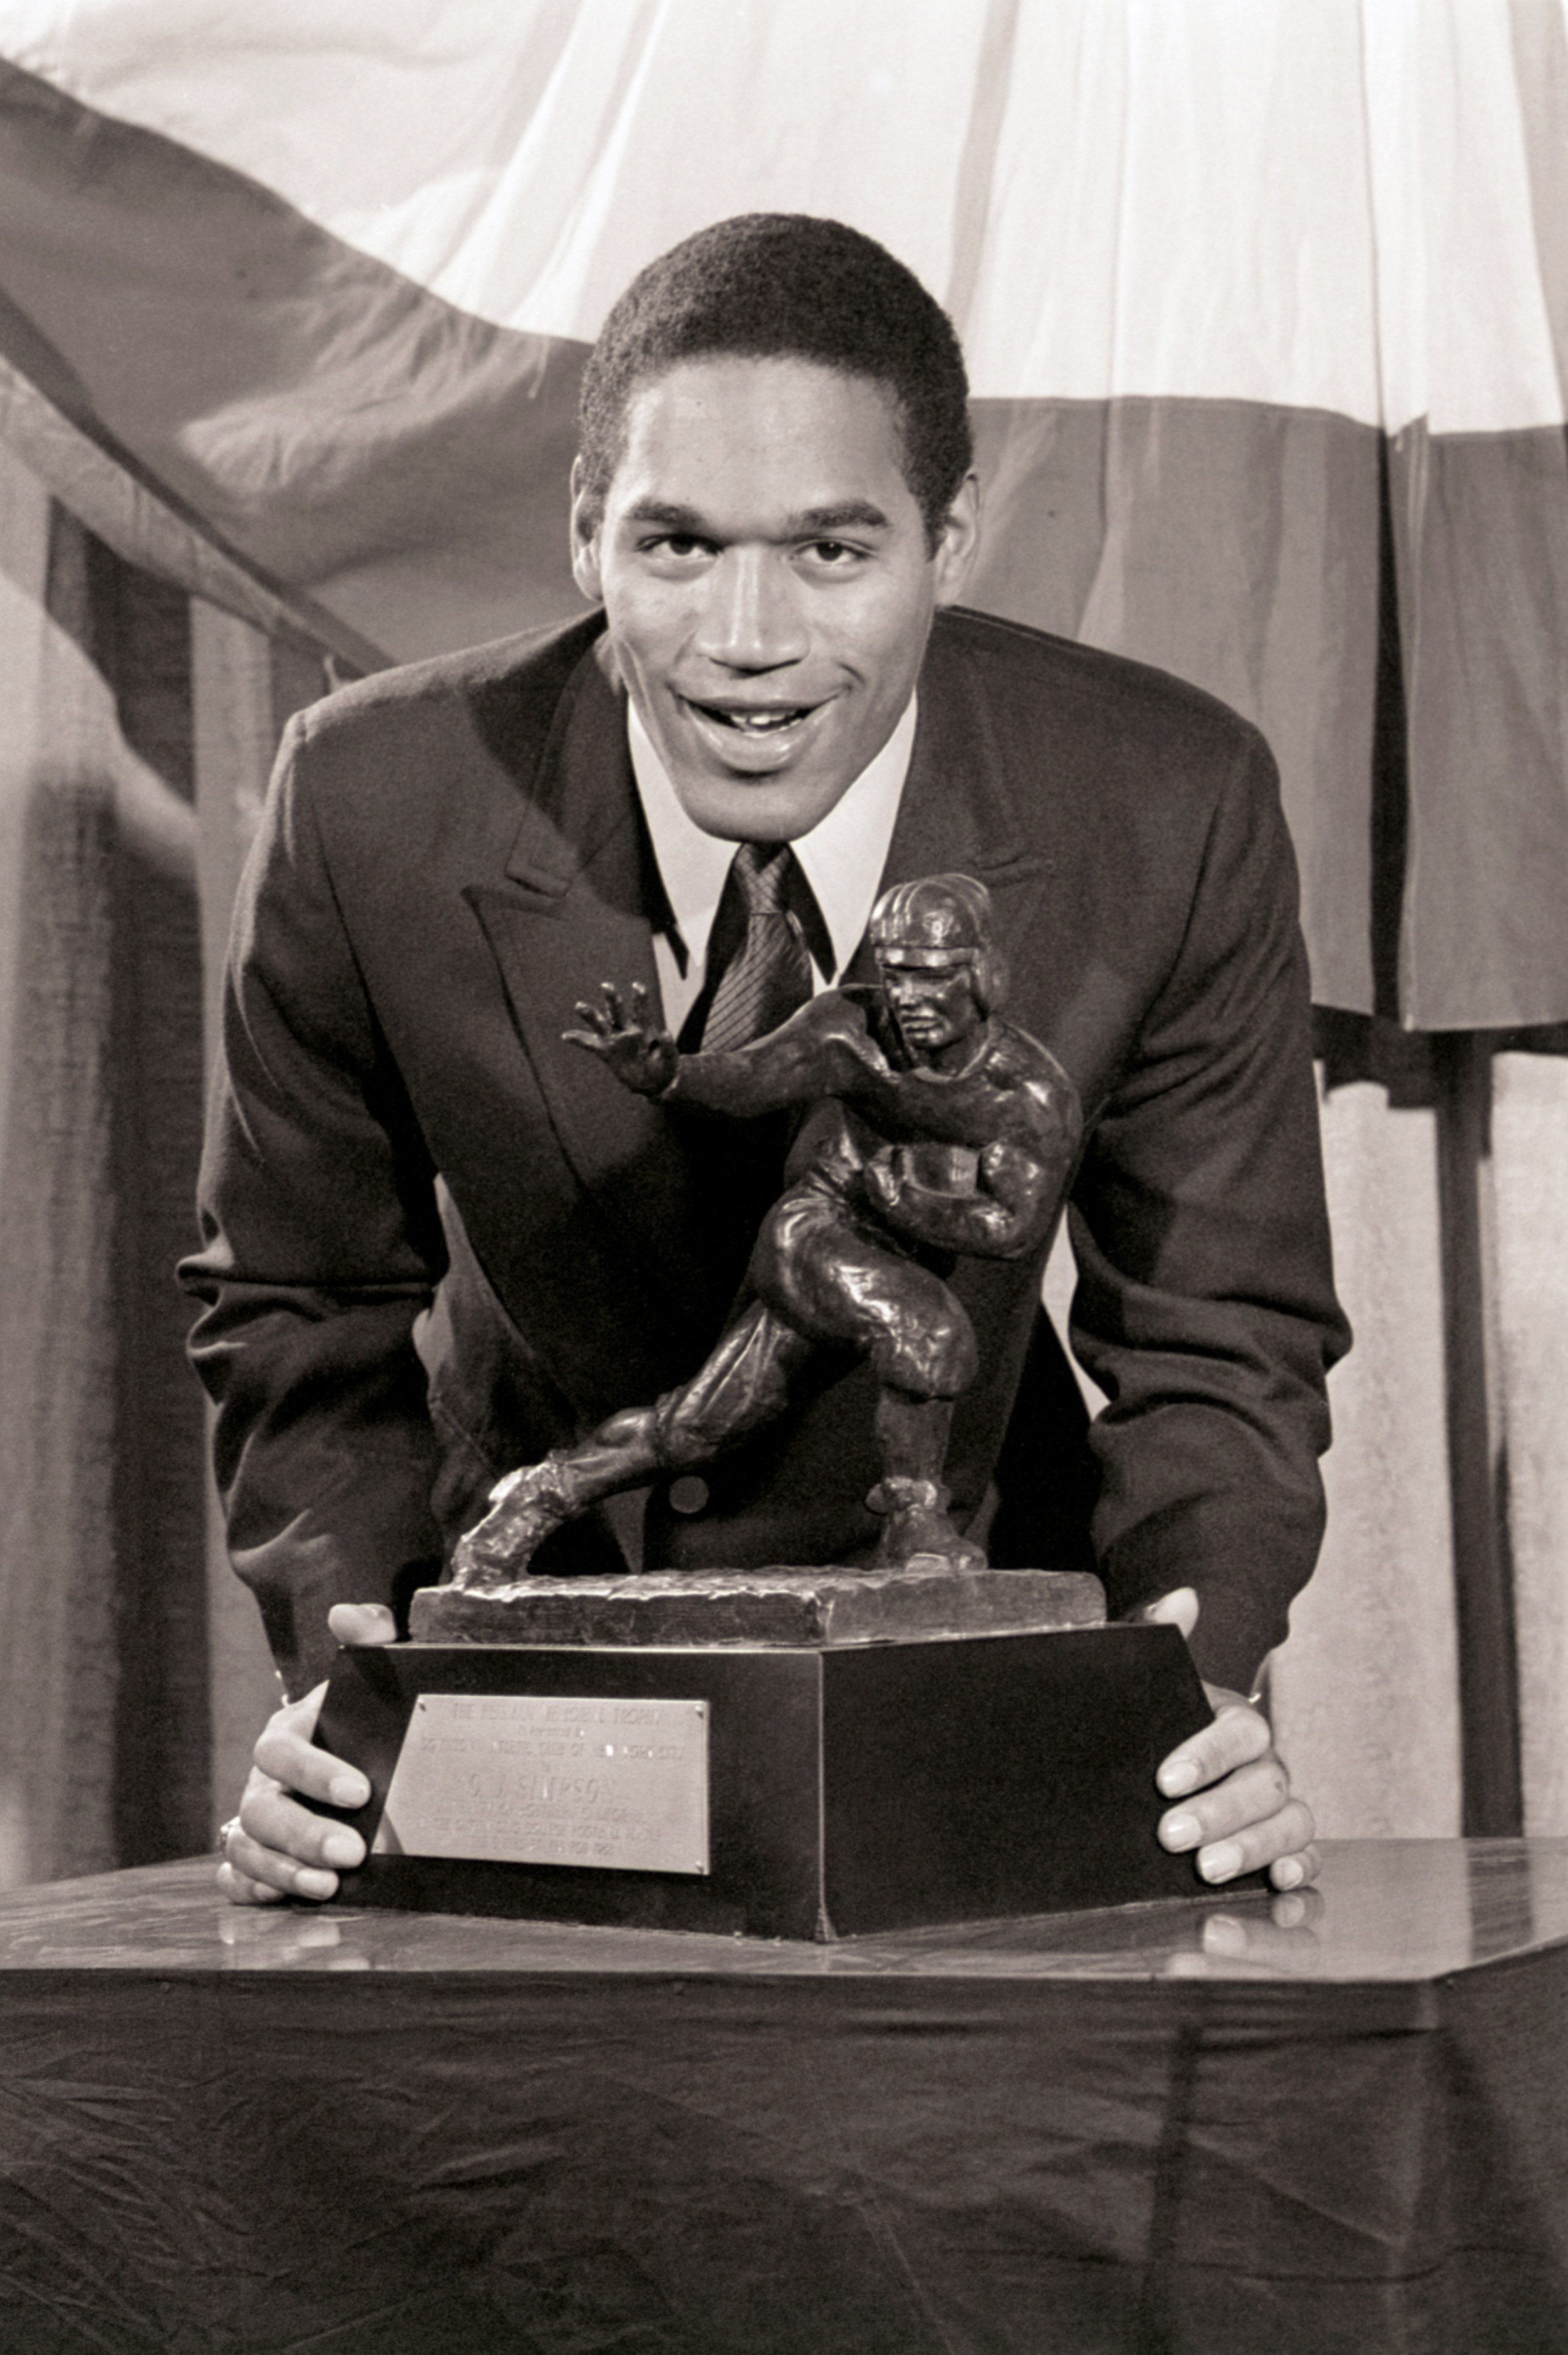 Simpson poses with the Heisman Memorial Trophy after receiving the award in 1968. 